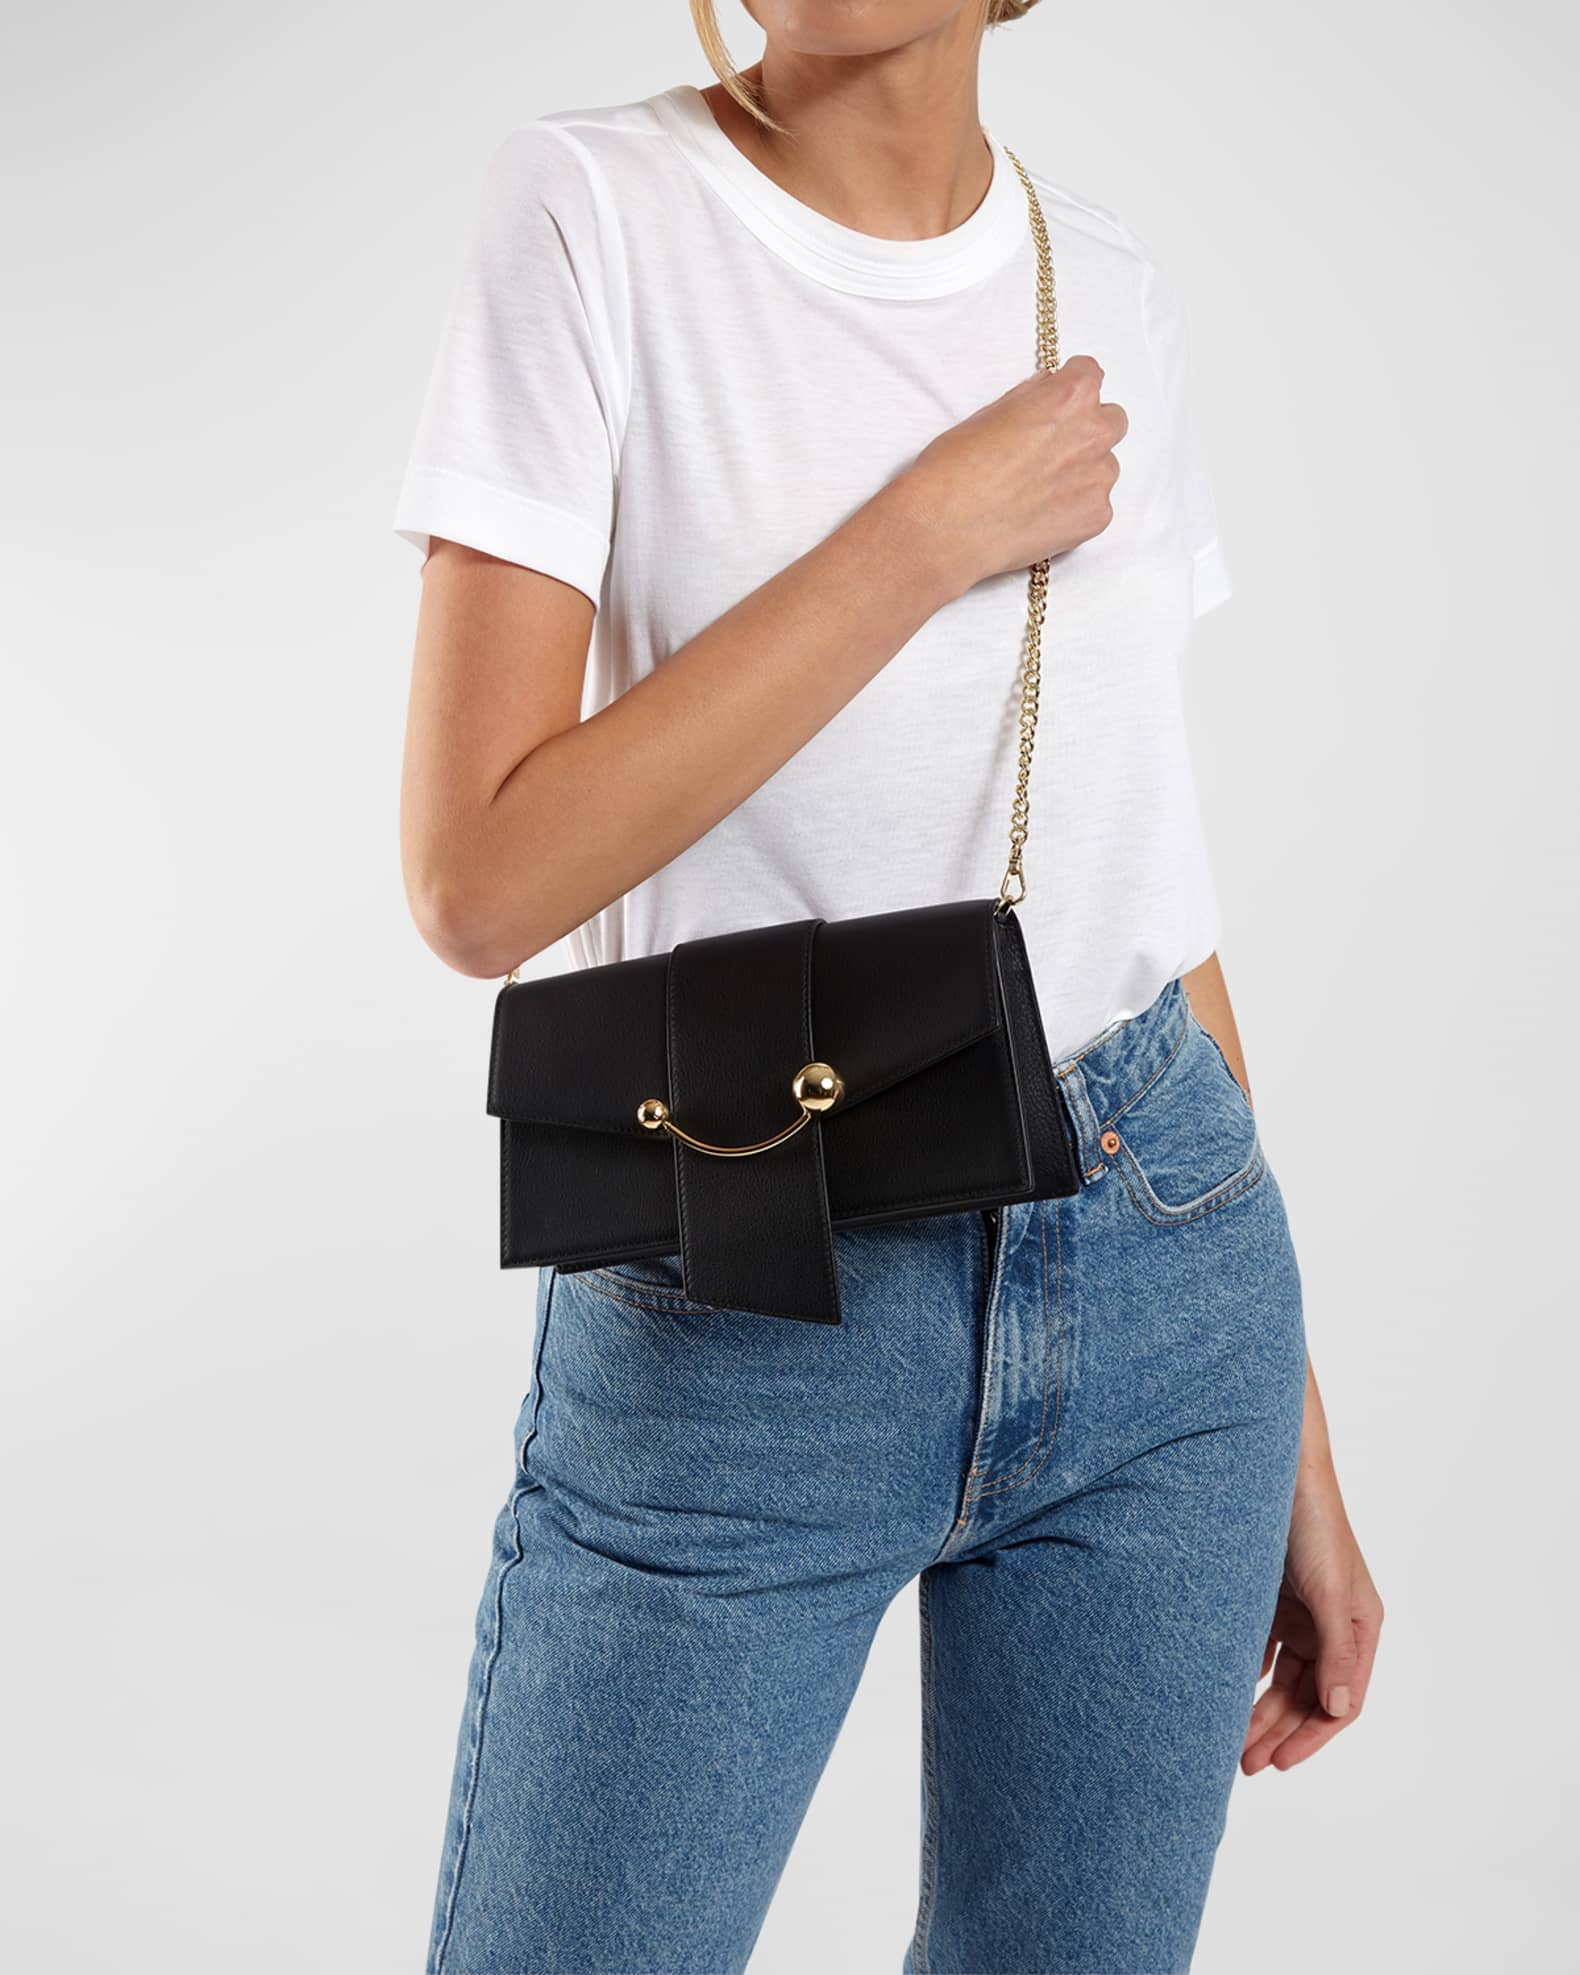 Women's 'mini Crescent' Leather Bag by Strathberry